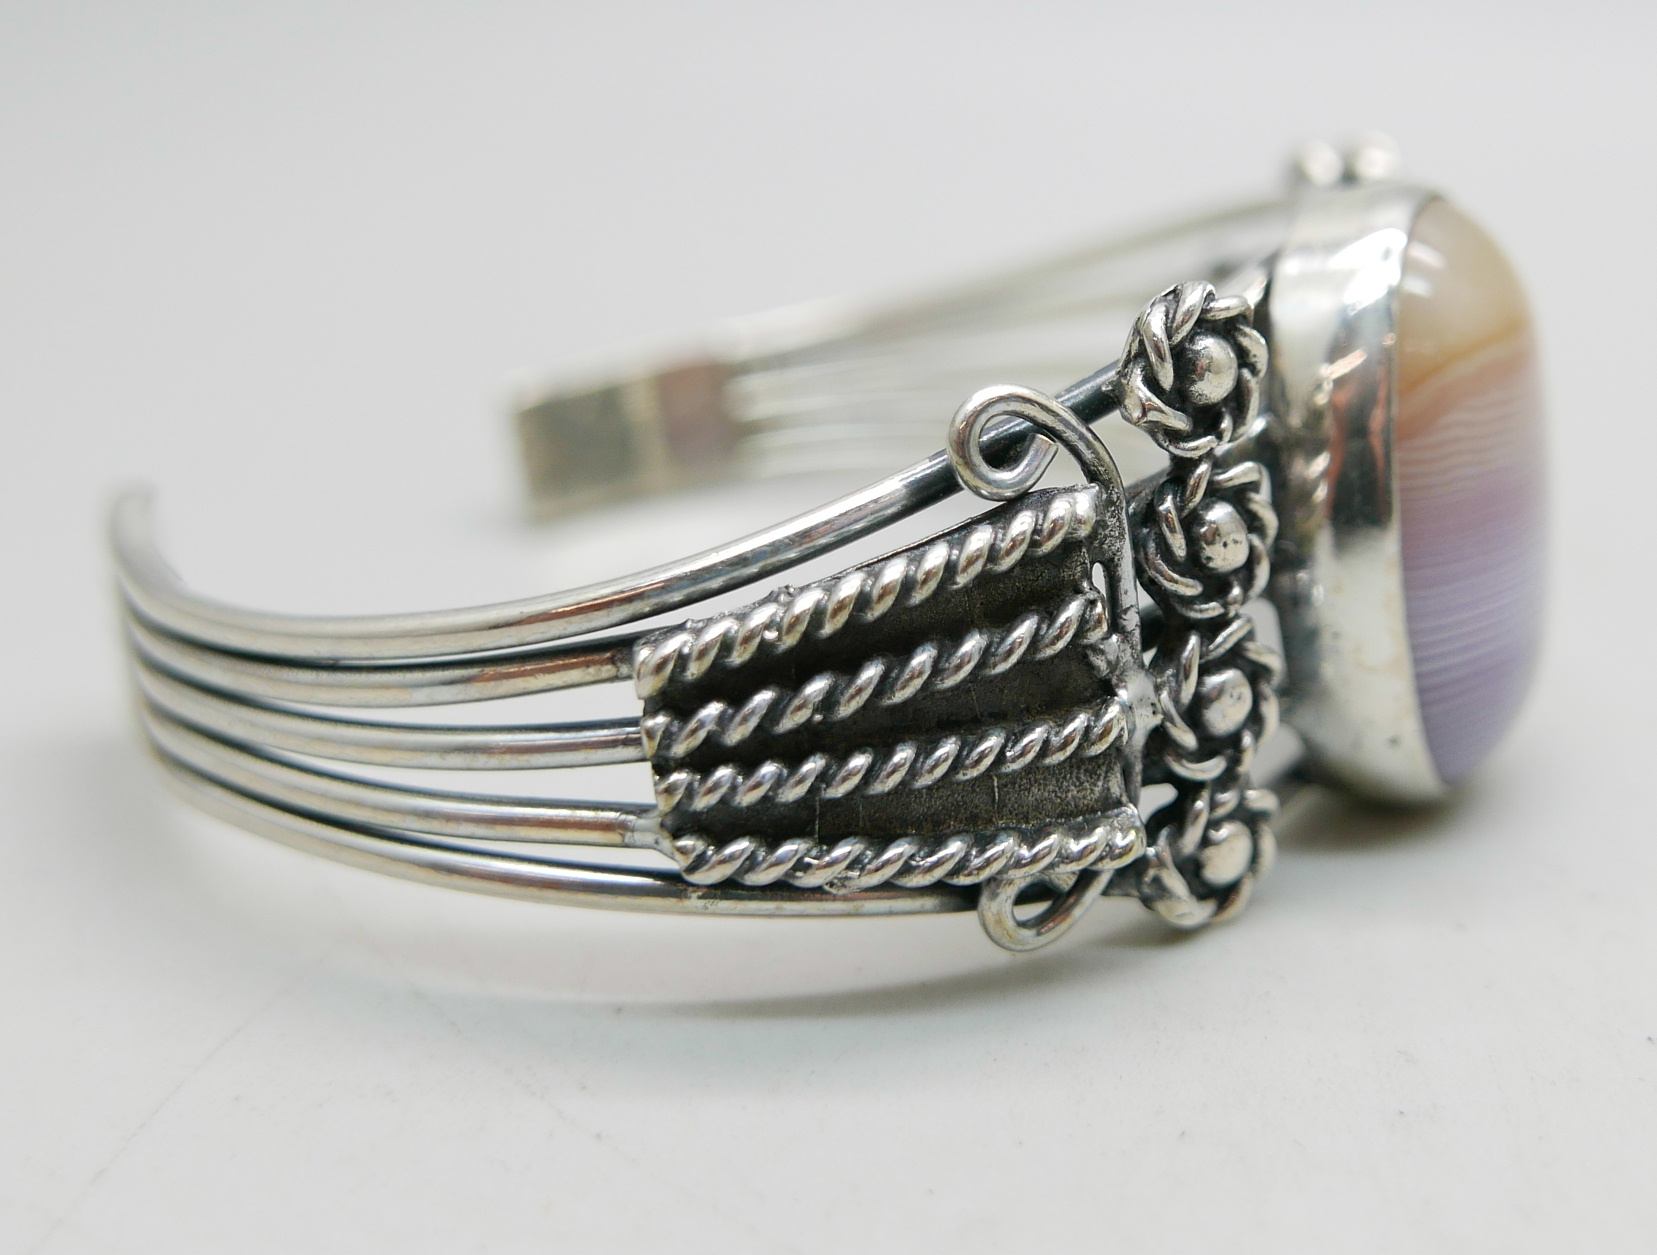 A 925 silver and stone set bangle - Image 6 of 6